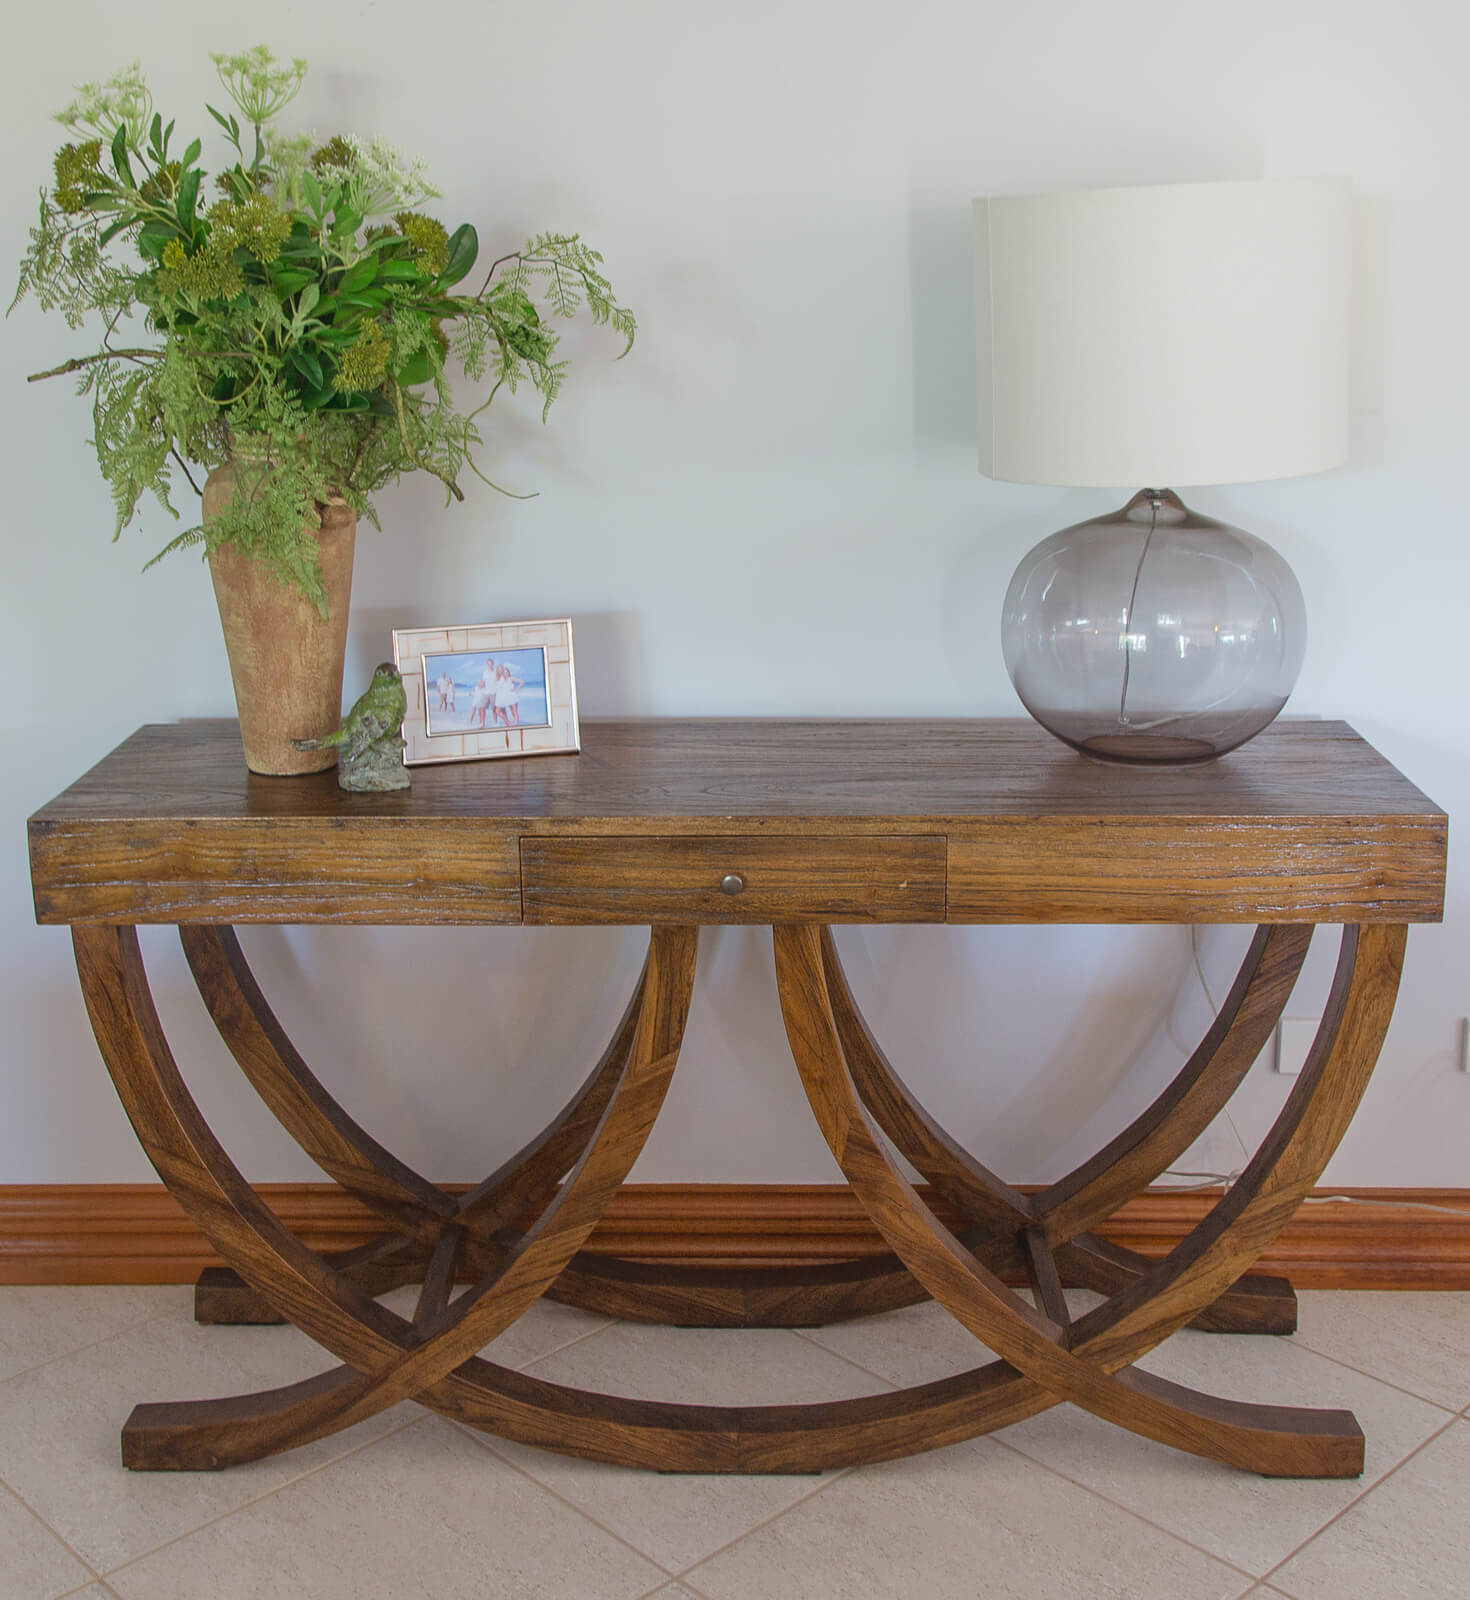 INVERTED ARC | RUSTIC TIMBER CONSOLE TABLE